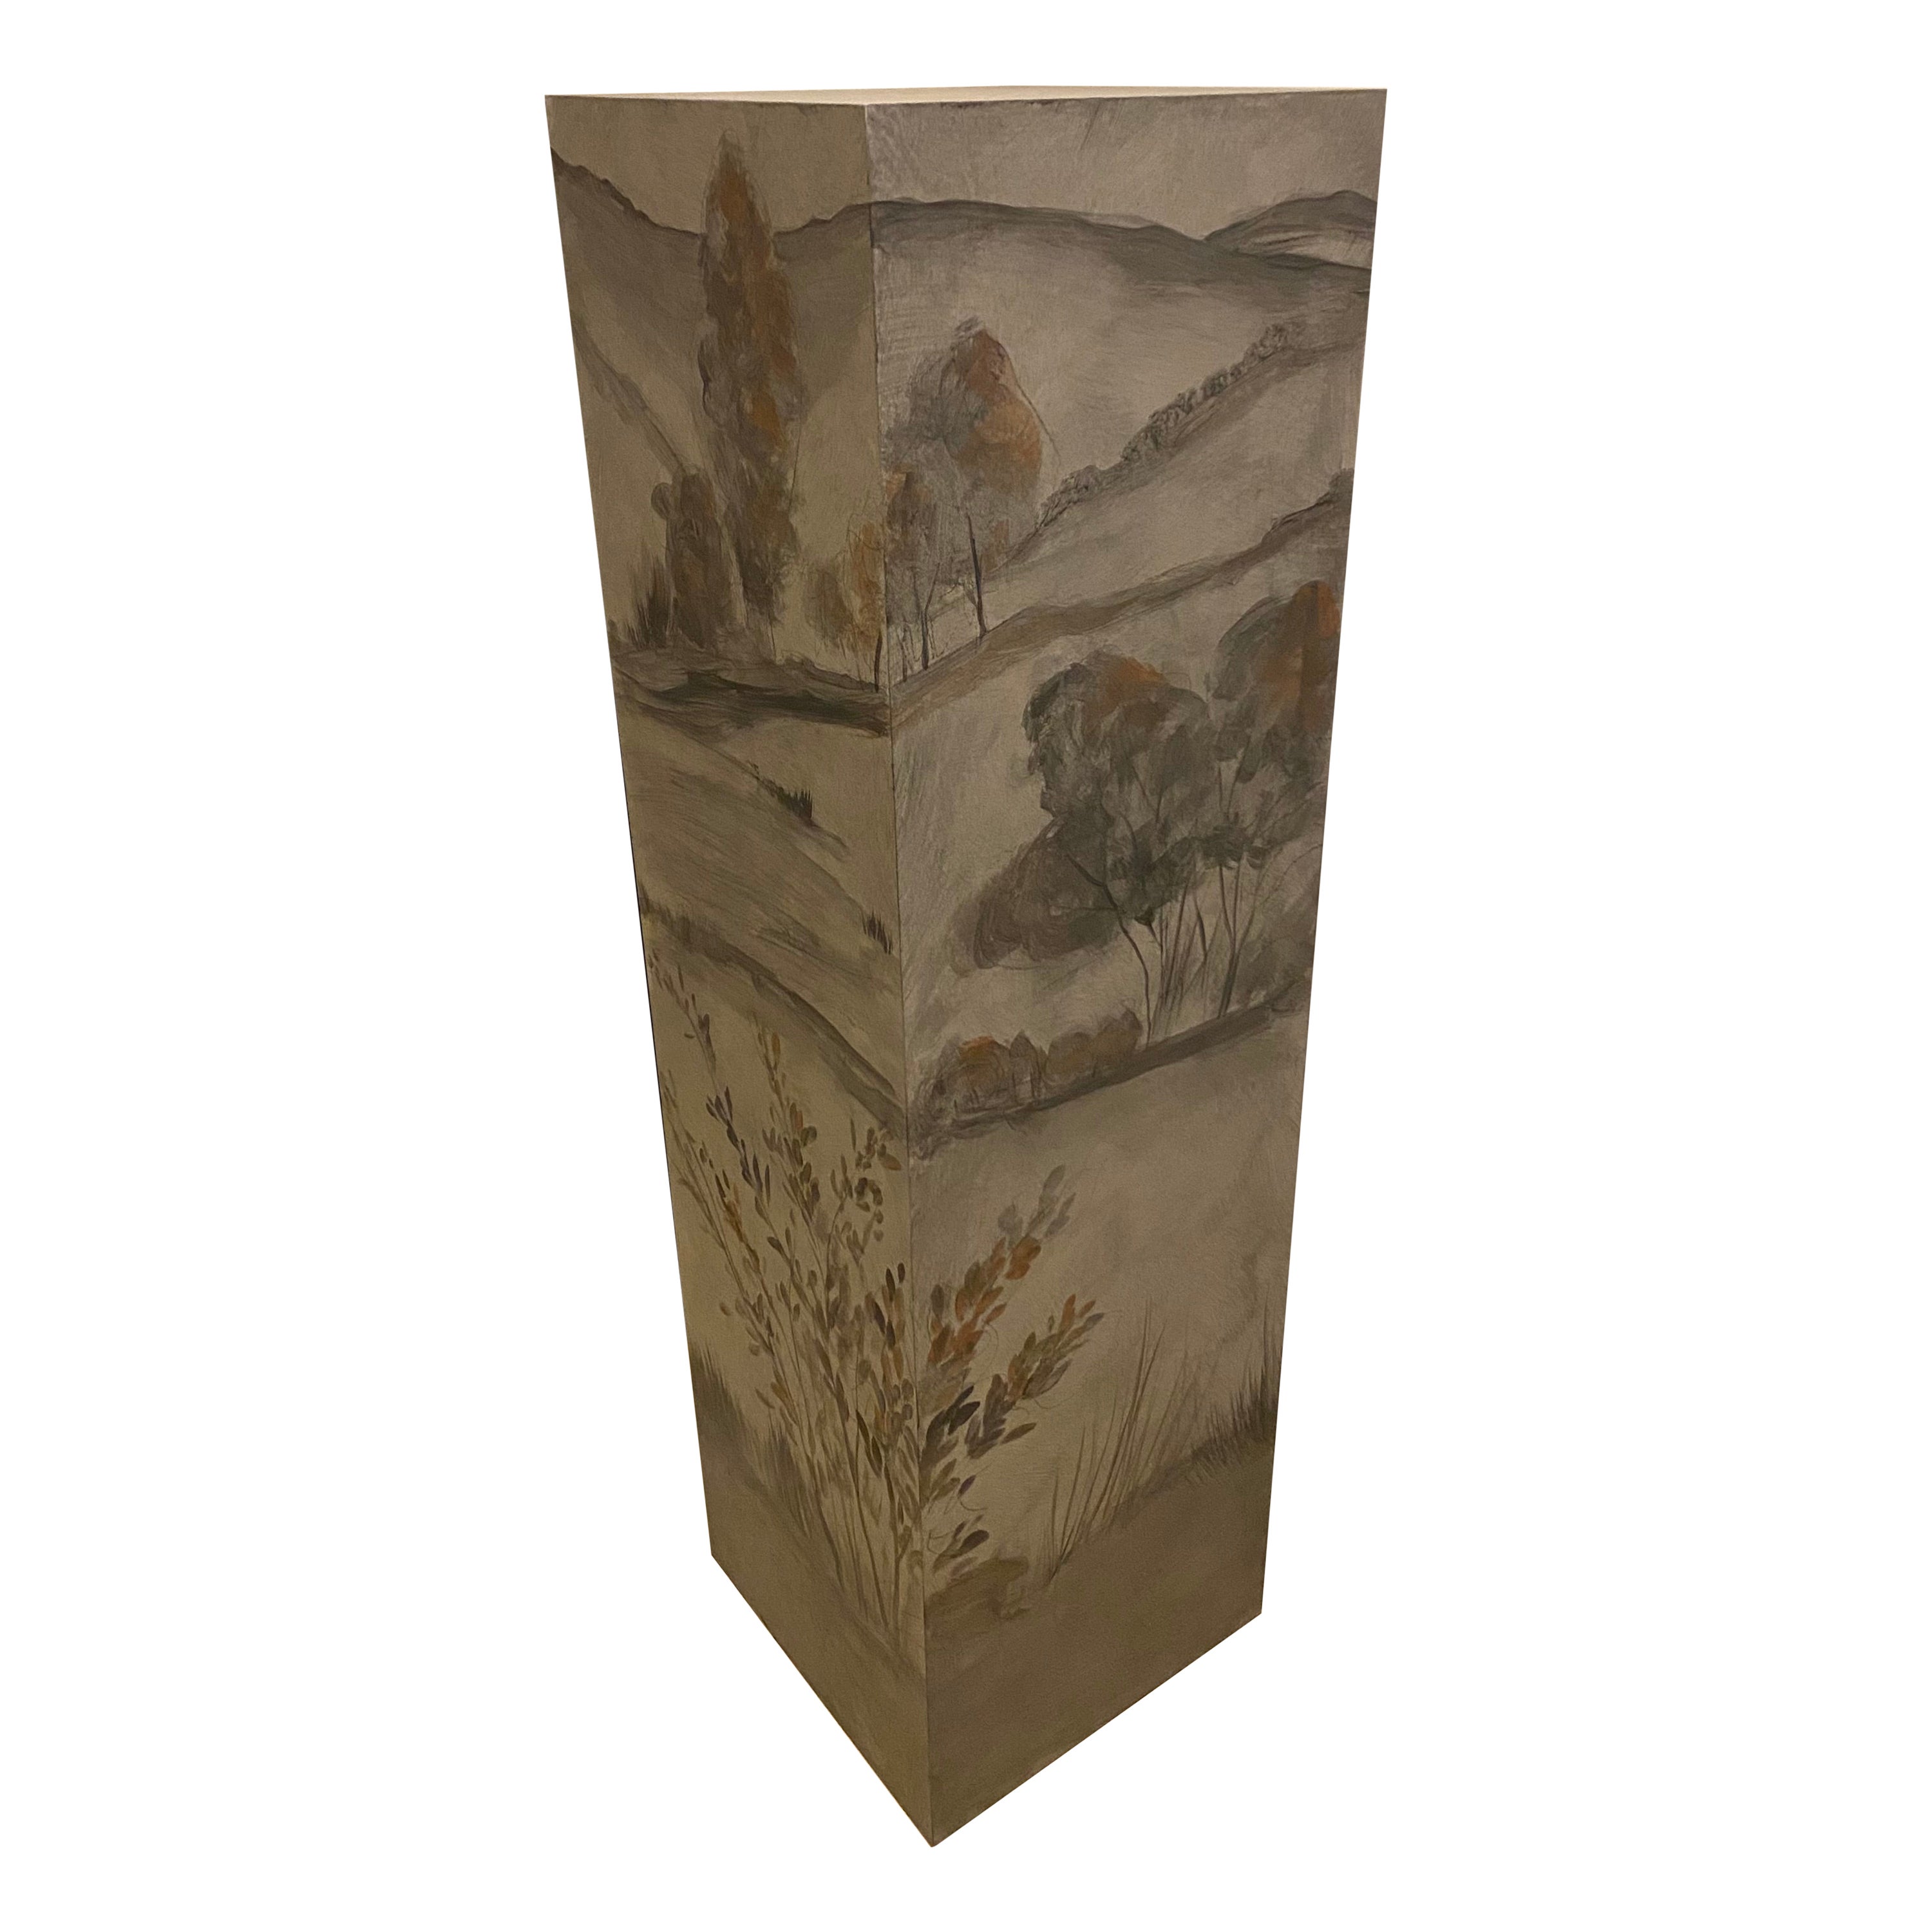 One-of-a-kind hand-painted pedestal. Adorned with a scenic landscape hand-painted by James Mobley in Los Angeles, CA.